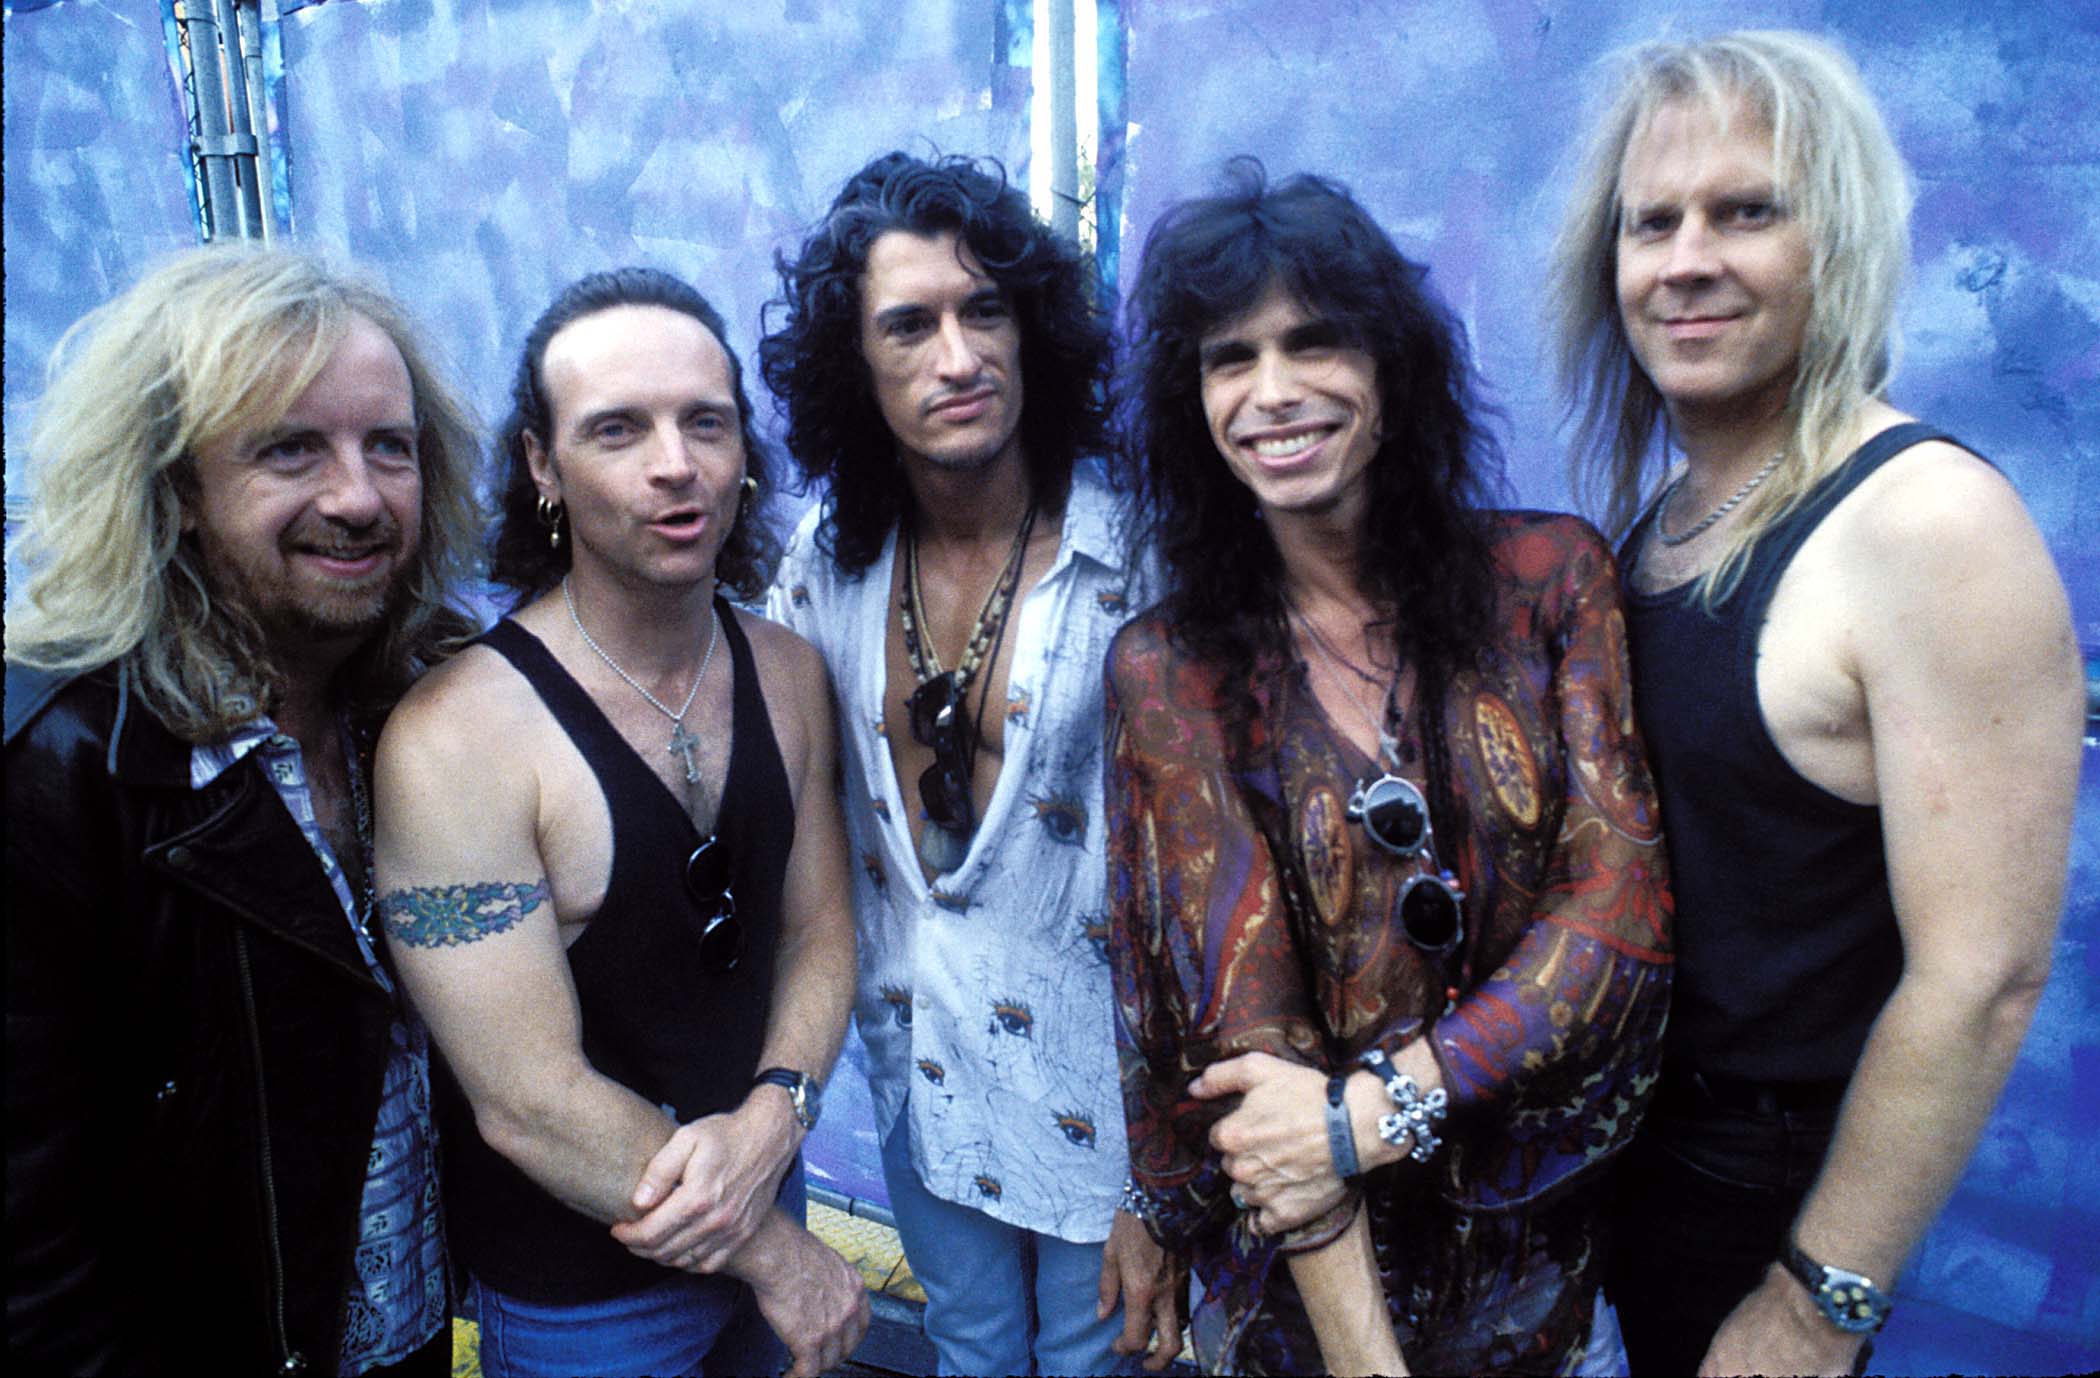 Aerosmith in front of a blur background